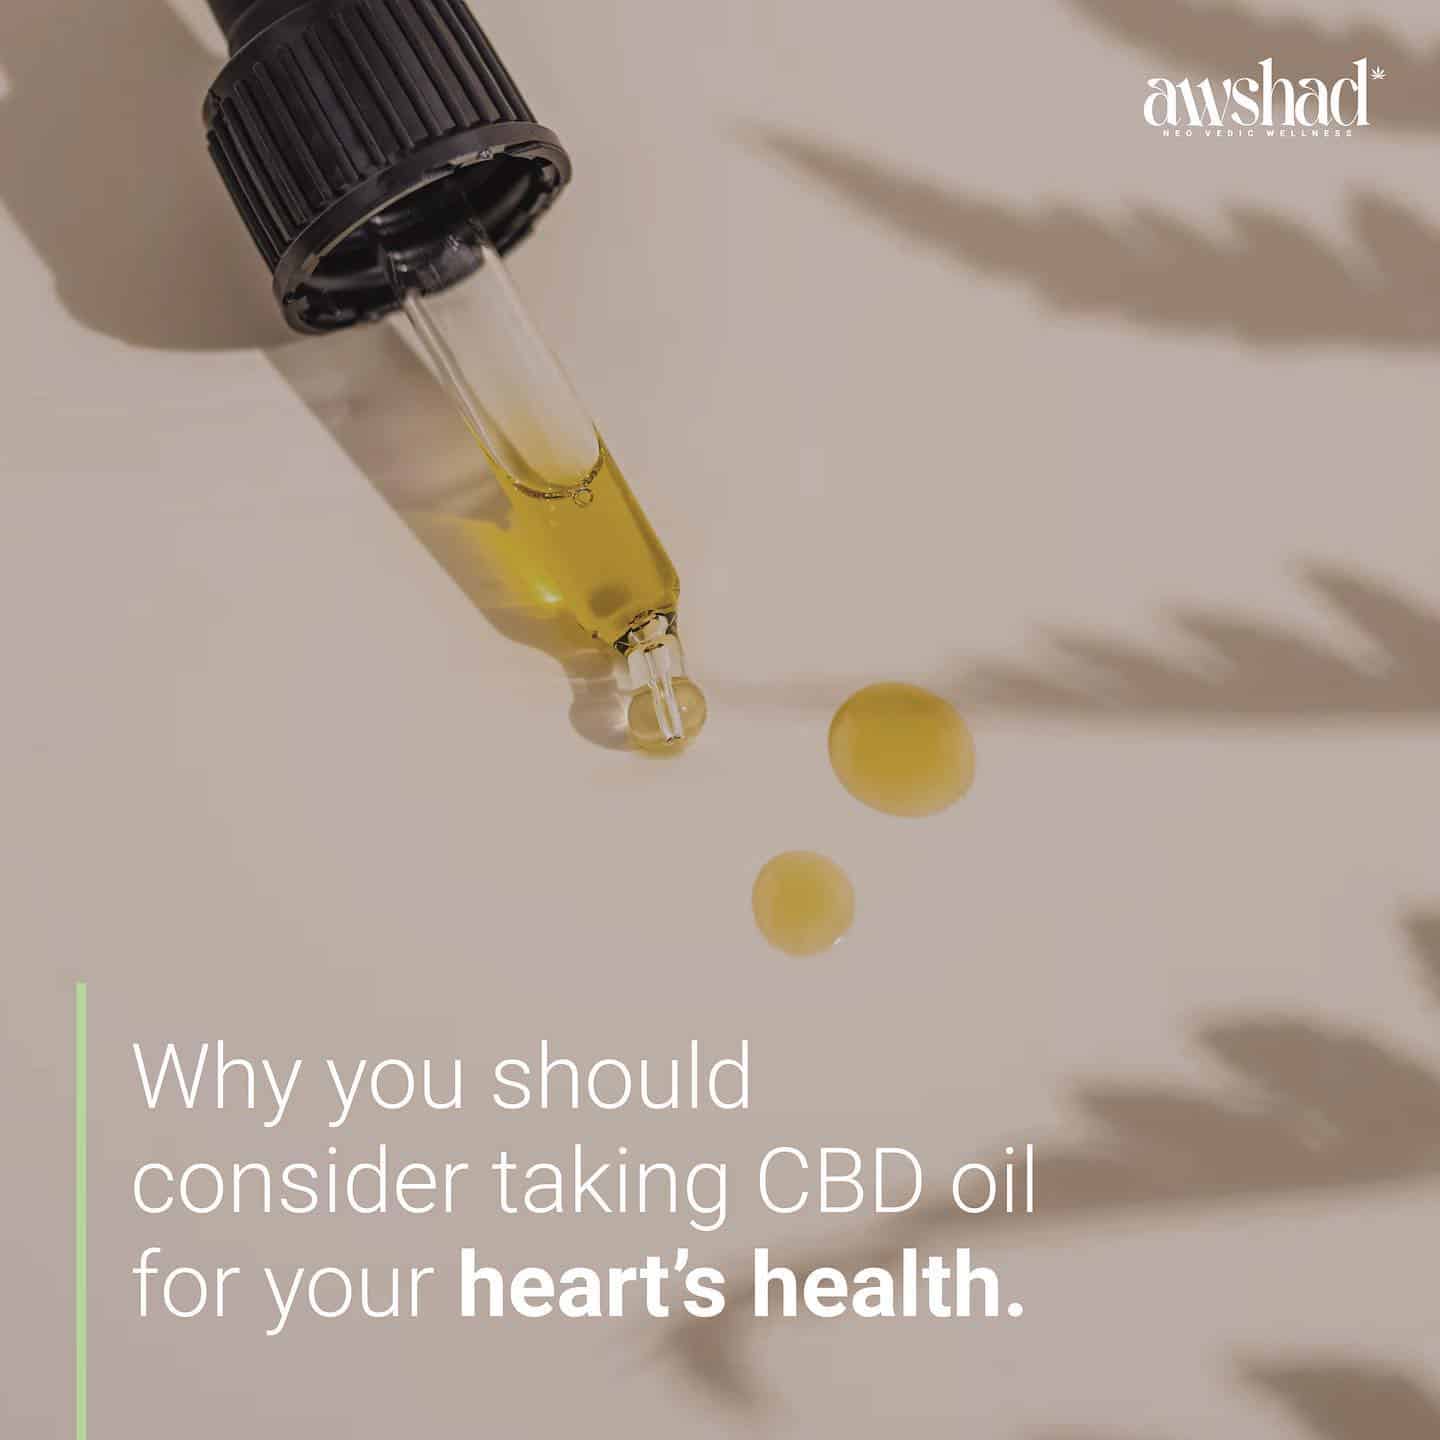 One cannot deny that diseases and issues related to the heart are on a rise all across the world. Some of the most important risk factors for heart disease include smoking, high blood pressure, and higher total cholesterol.

While making changes in food and lifestyle are considered the most effective ways of improving heart health, research also indicates that CBD oil can support the cause. 

Due to its anti-inflammatory and antioxidant effects, CBD may be able to lessen risk factors for heart disease, such as high blood pressure. It might be able to lower the risk of associated problems such as stroke by reducing the risk of metabolic syndrome and delaying atherosclerosis. 

This #WorldHeartDay let us share this crucial information with our loved ones. Let them know the all-natural healing power of CBD oil.

#awshad #allnatural #hempbenefits #heart  #wellness #cardiology #hearthealth #vijayaoil  #hempextract #hempproducts #health #health #healthandwellness #healthy #heal #natural #naturalremedy #ordernow #care #love  #safe #doctor #ayurveda #healing #newproduct